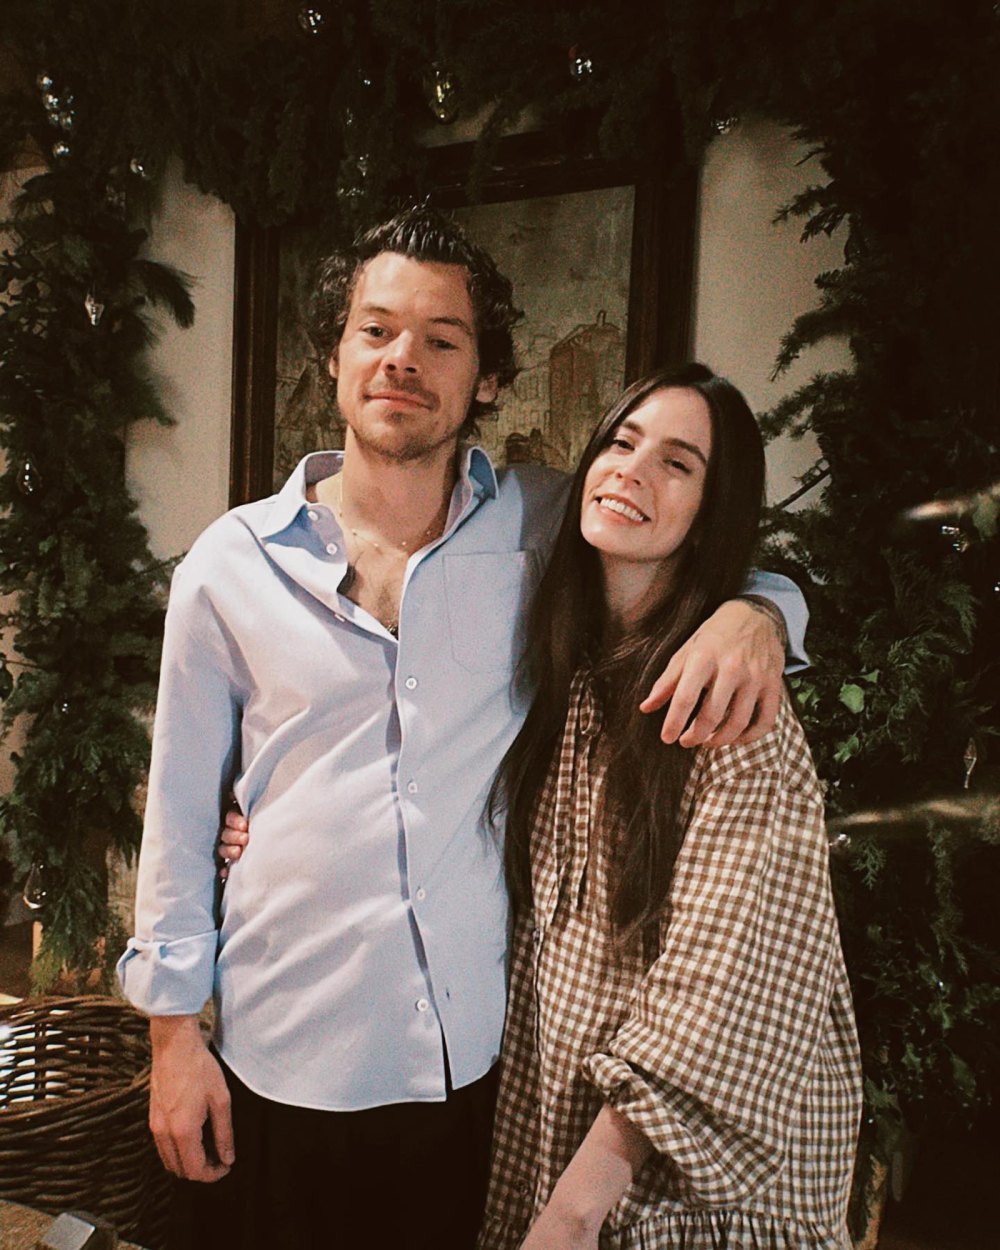 Harry Styles’ Sister Gemma Announces Arrival of Baby Girl: 'Hello From Maternity Leave'